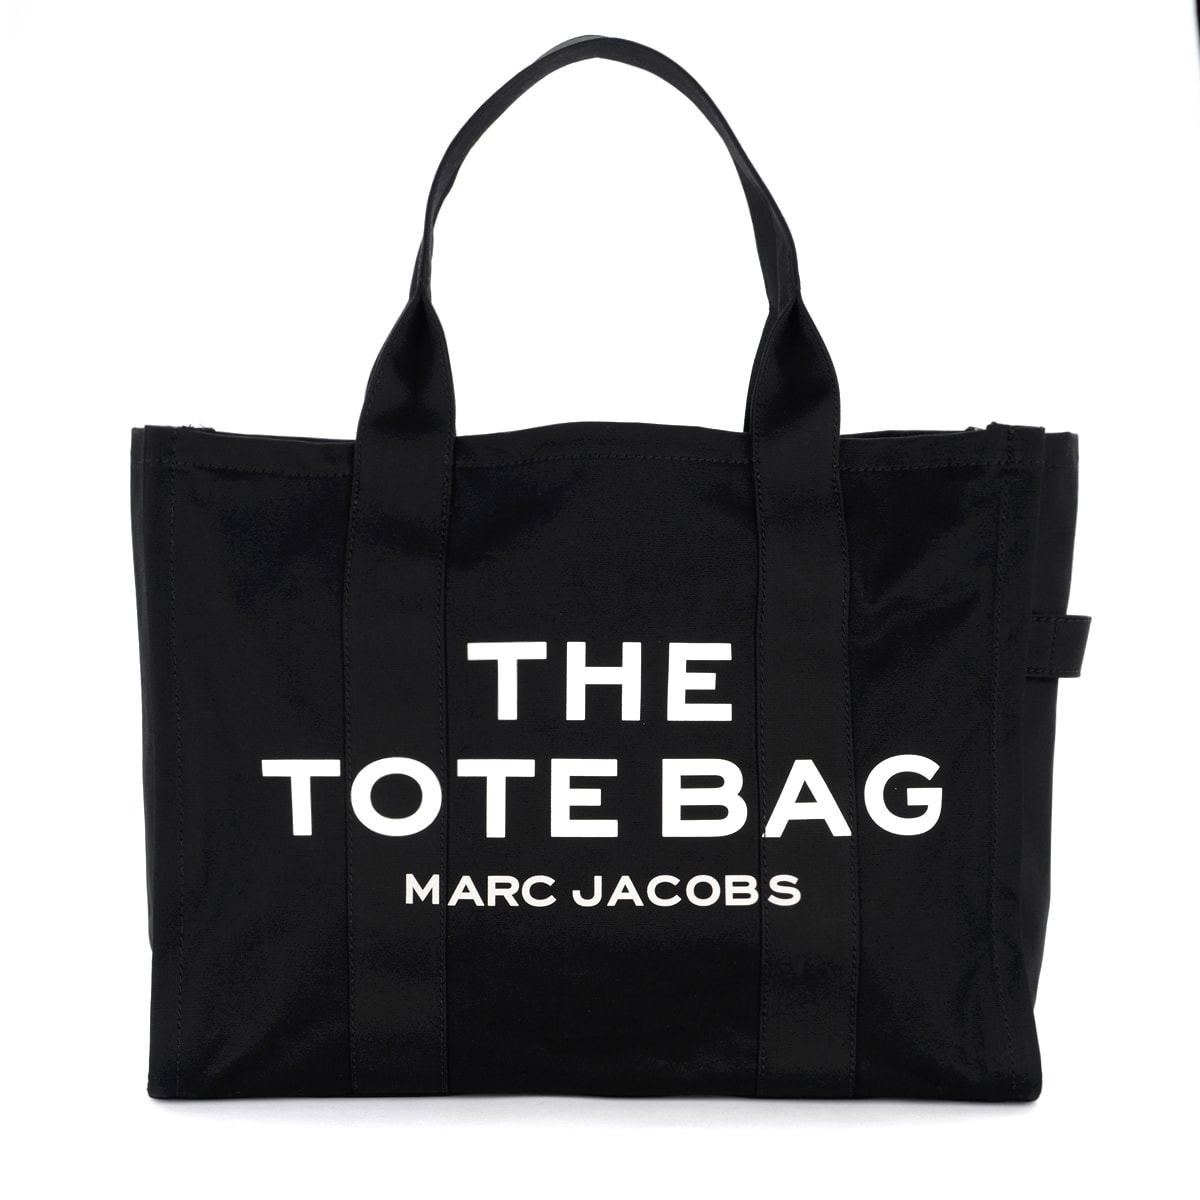 The Marc Jacobs The Xl Tote Bag Black